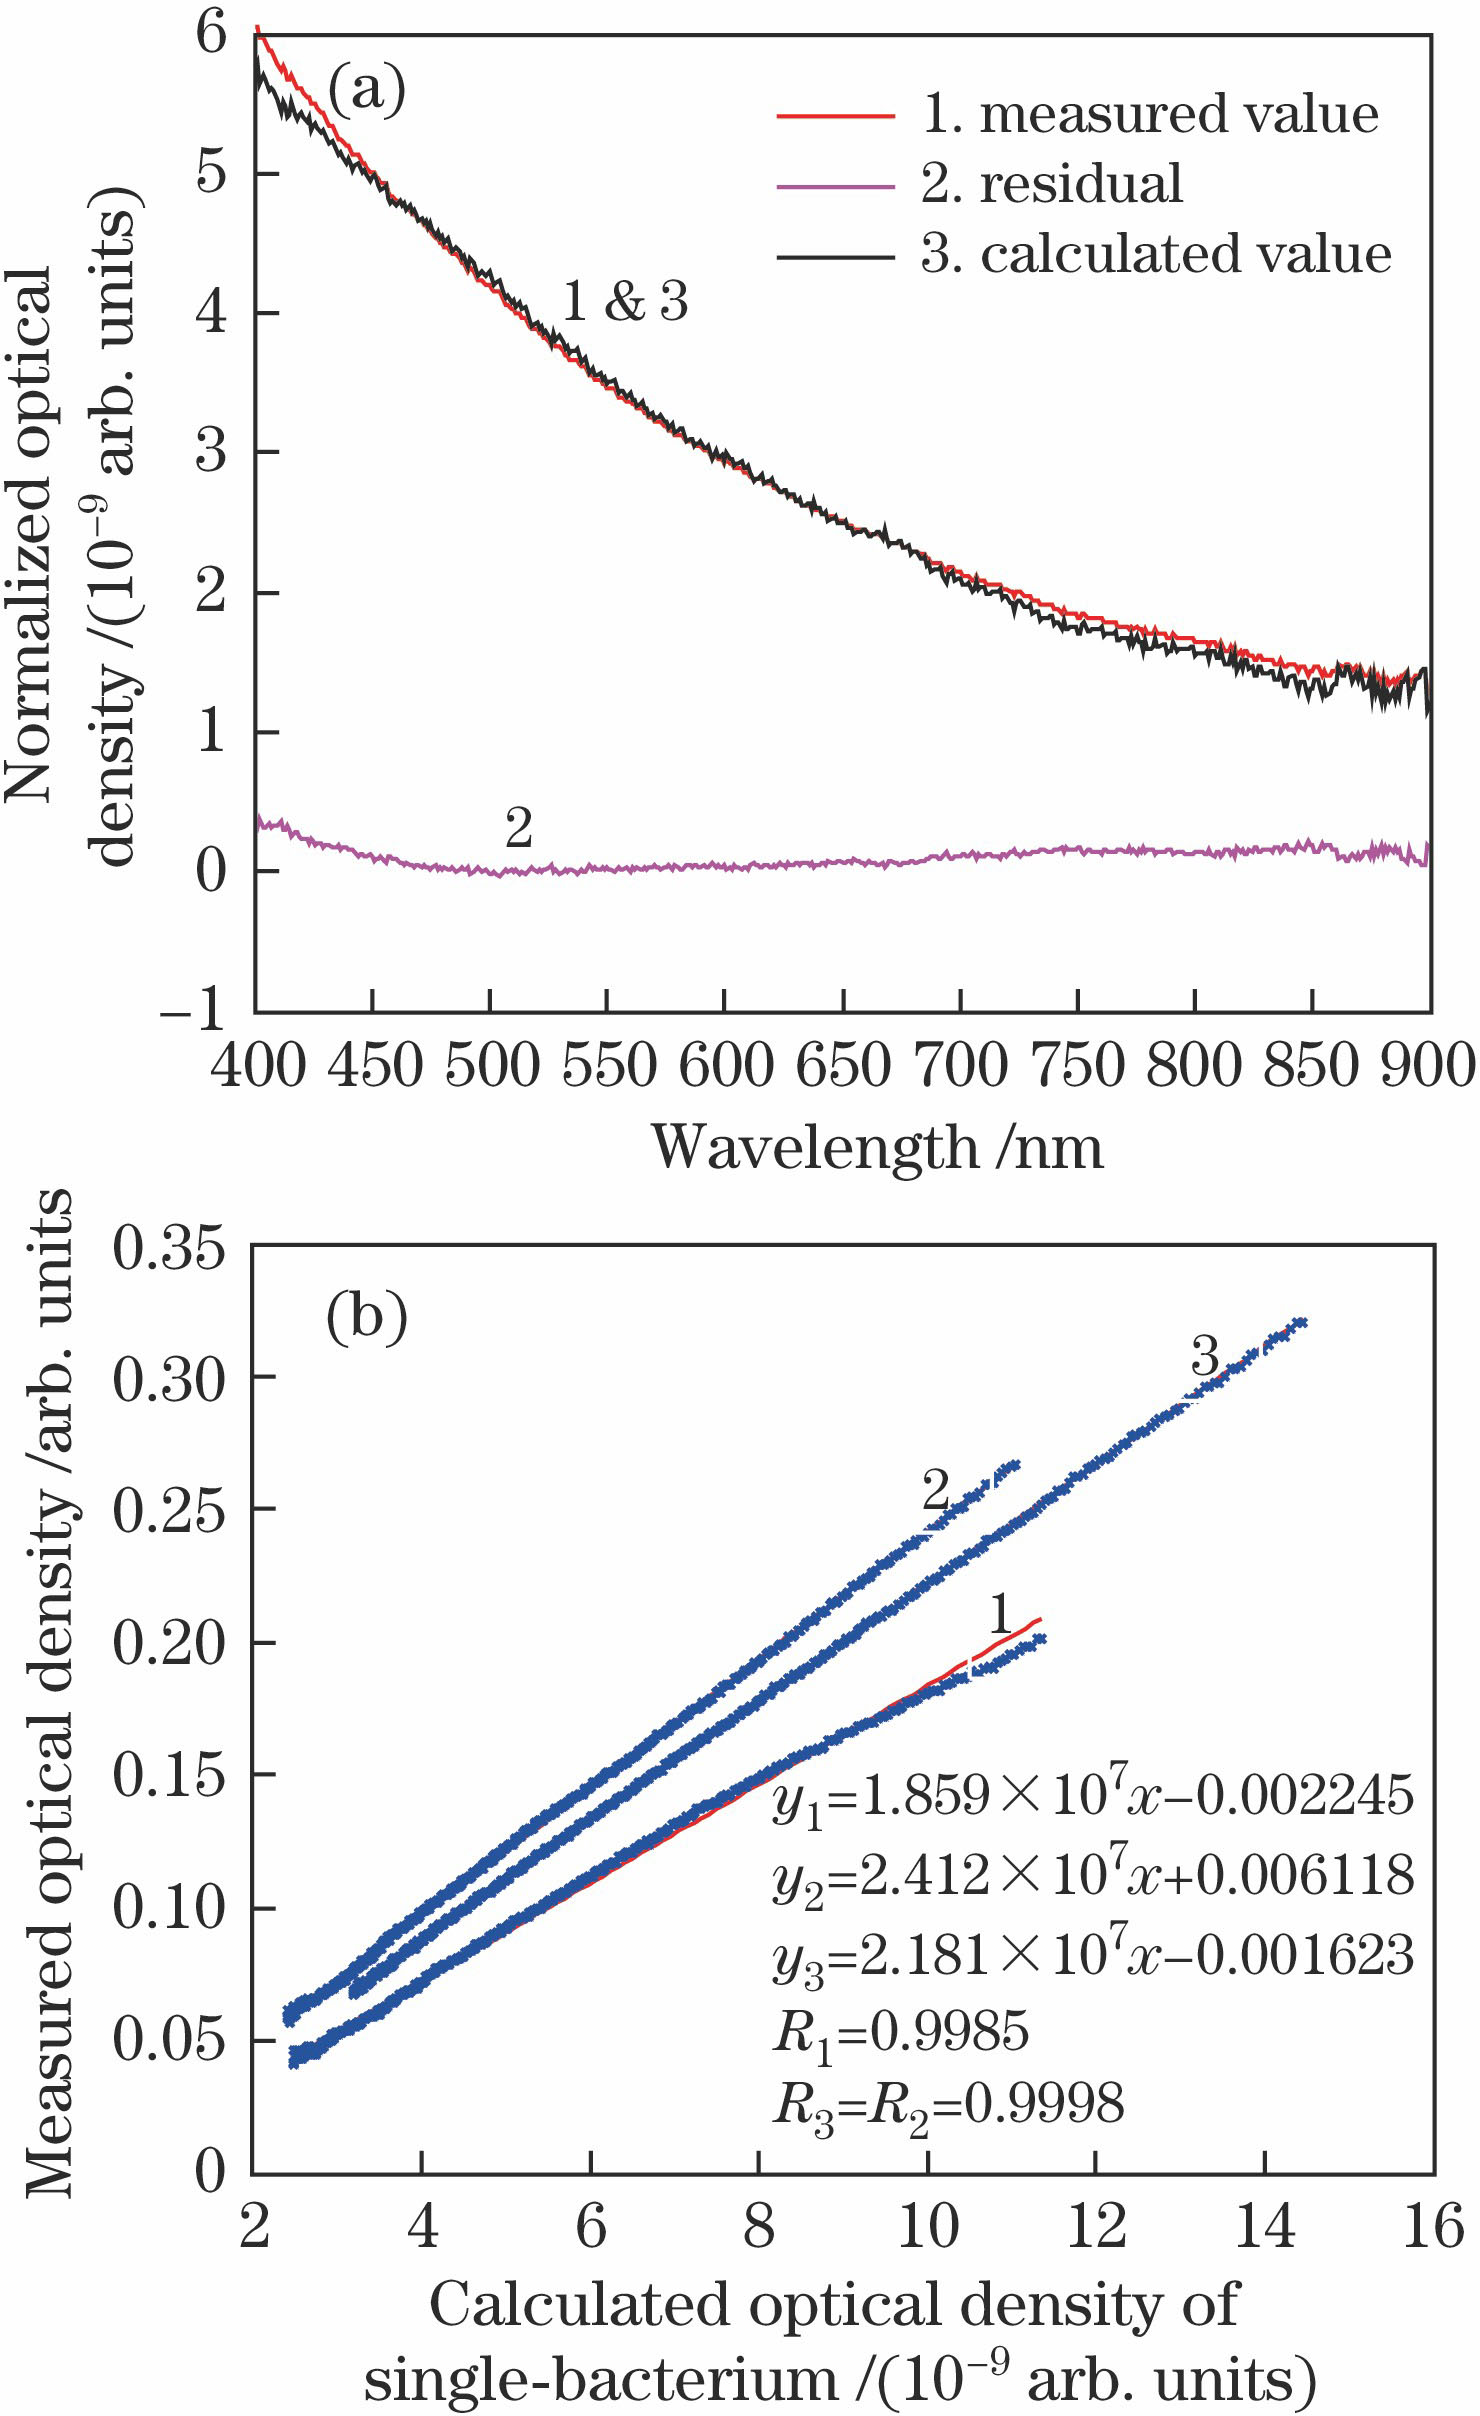 (a) Measured and calculated optical density of spectrum 1 after particle concentration normalization; (b) concentration fitting curves of three different transmission spectra